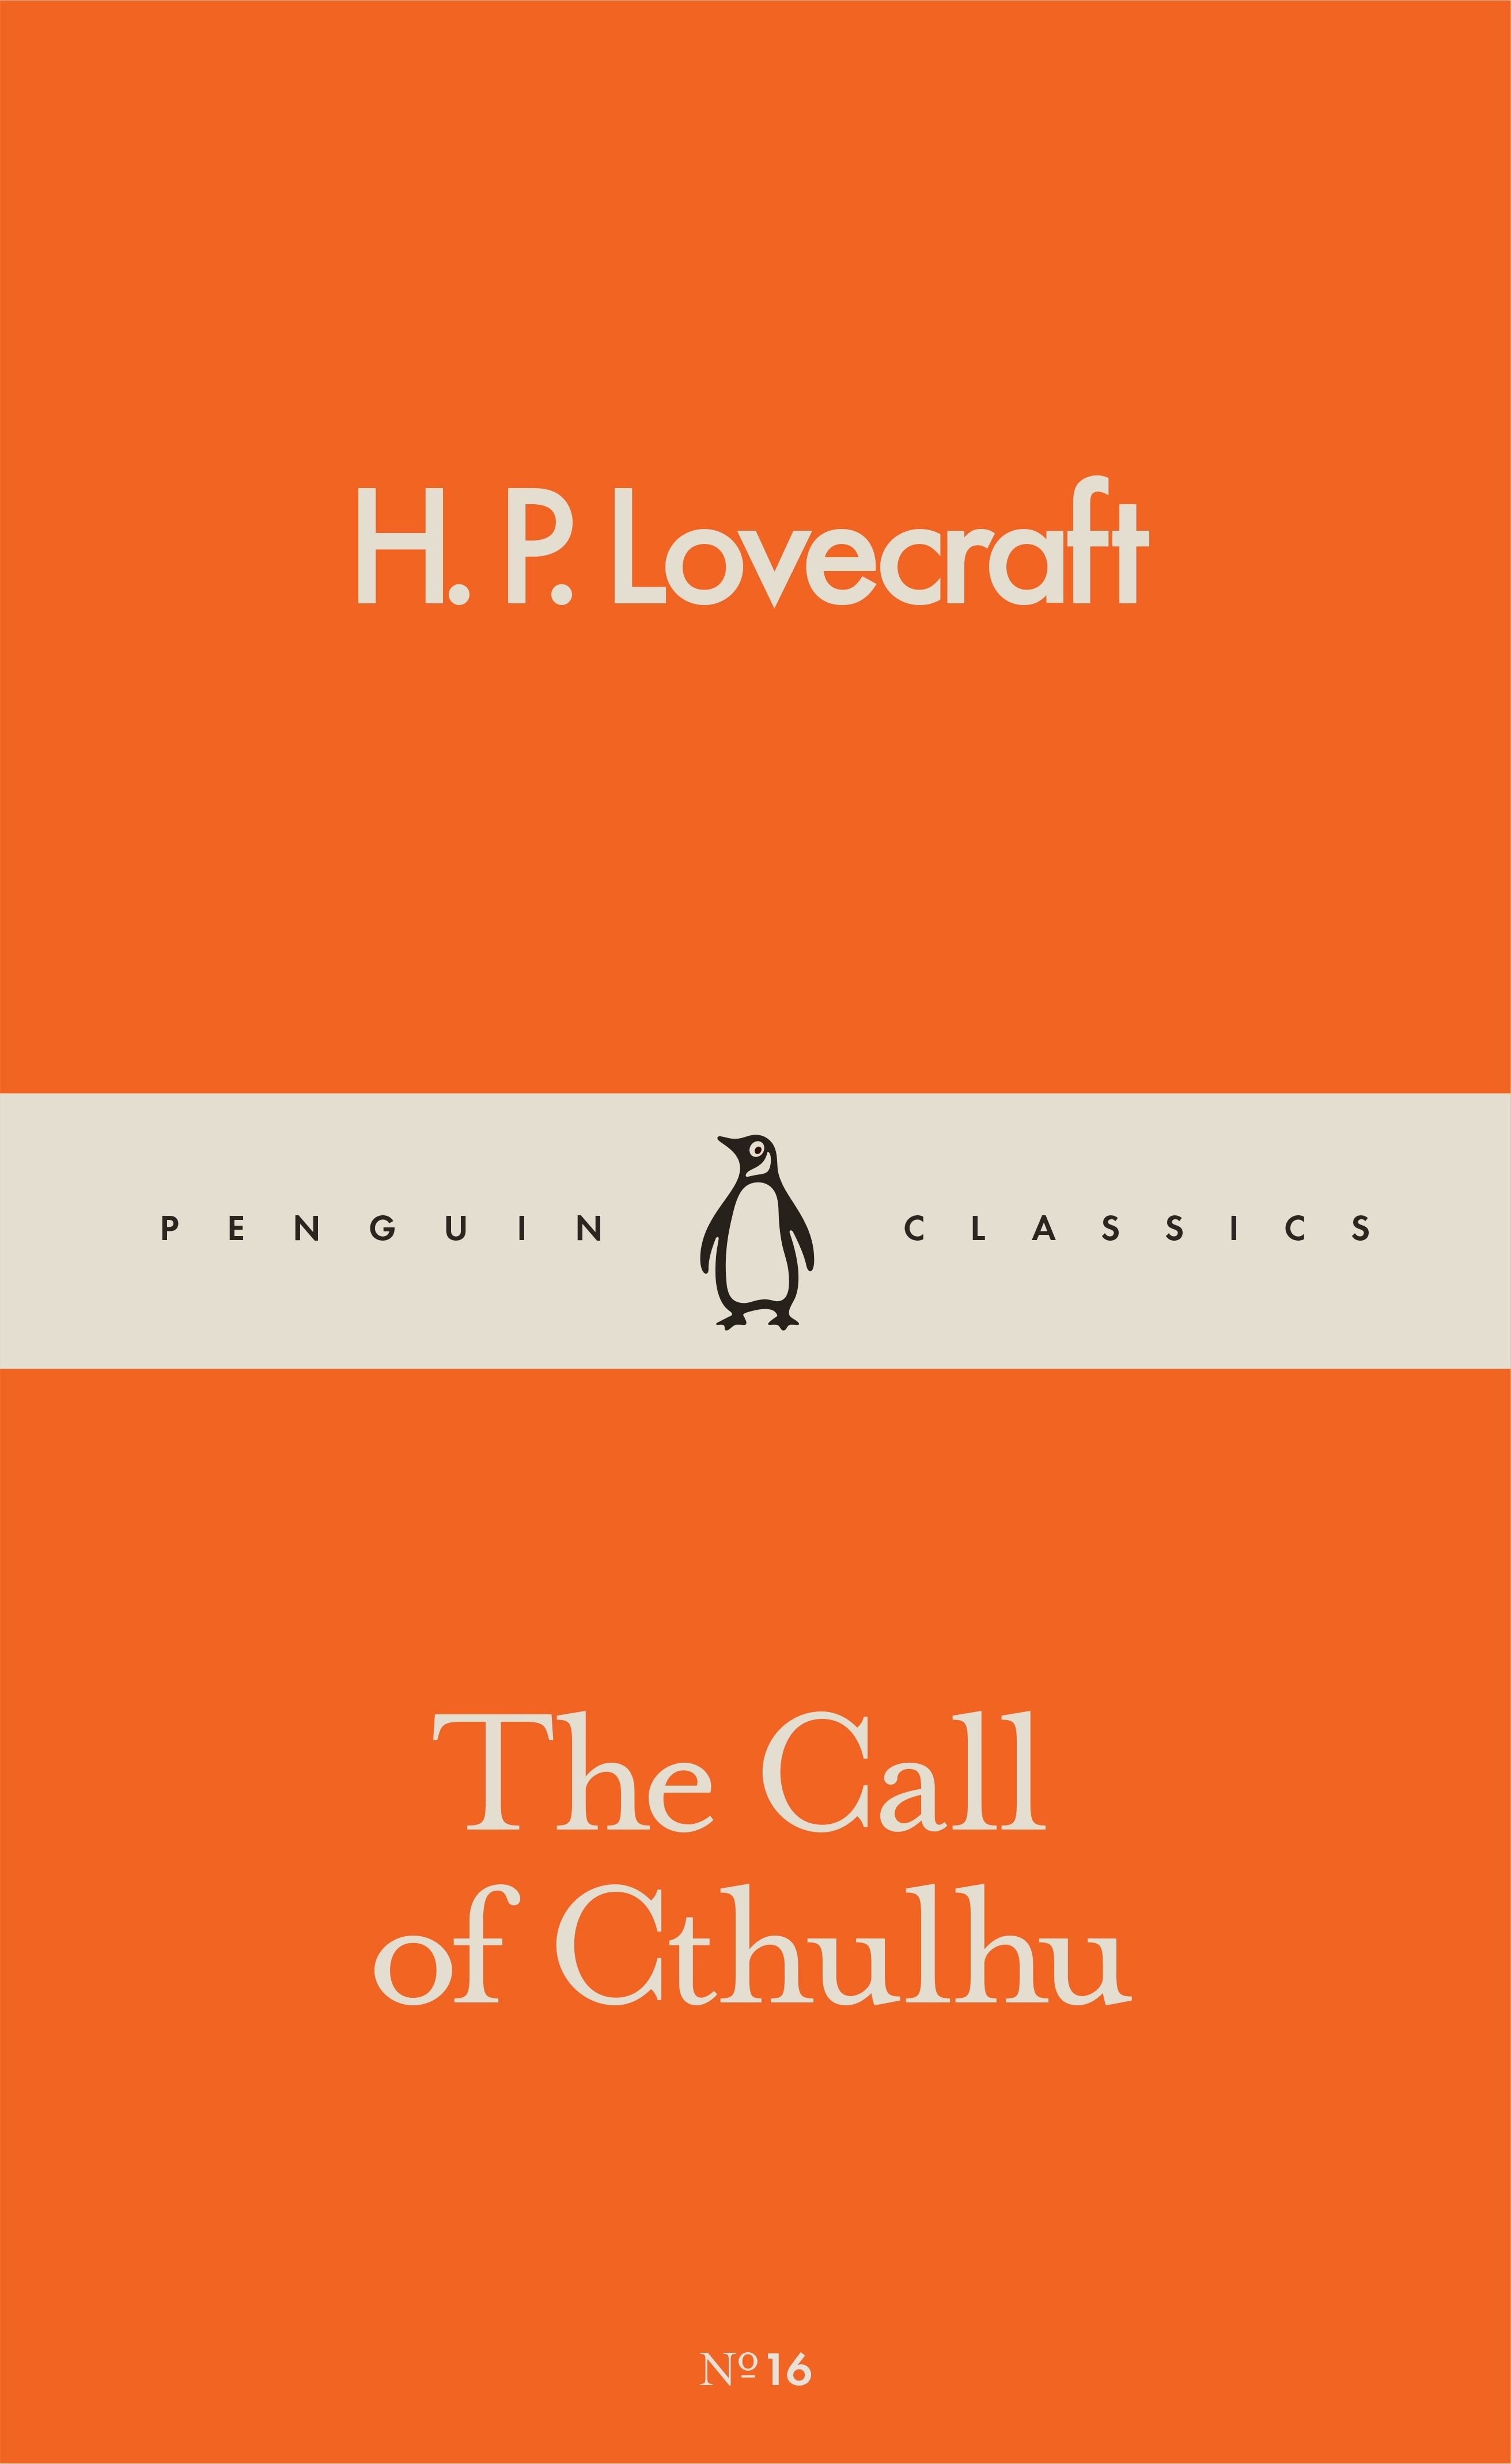 Book “The Call of Cthulhu” by H. P. Lovecraft — May 26, 2016